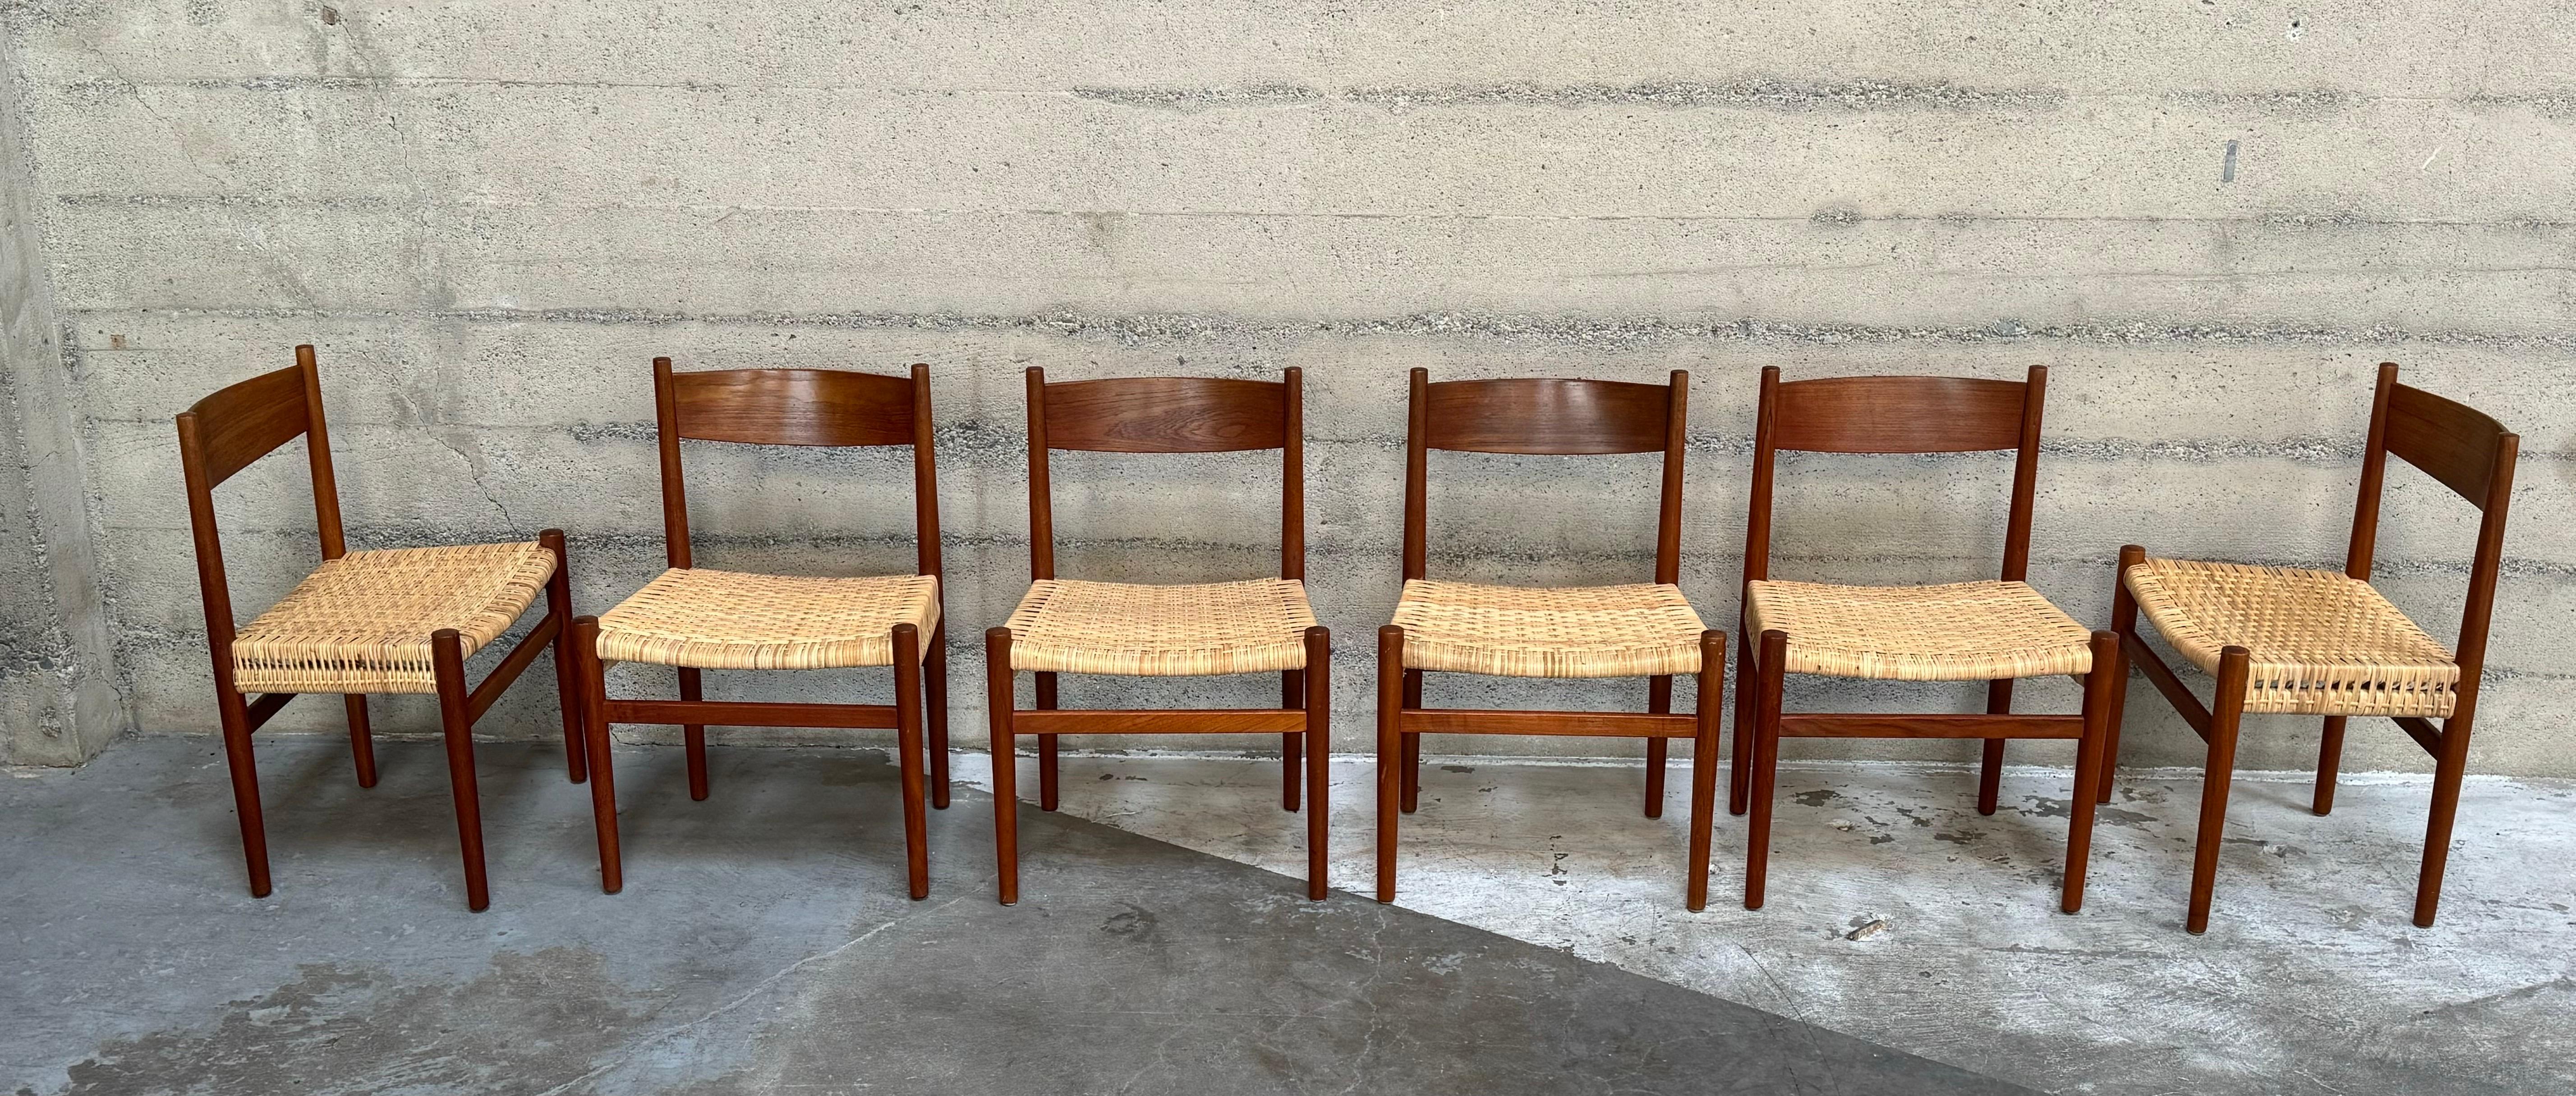 Model CH40 dining chairs in Teak, by Hans J. Wegner for Carl Hansen. Made in Denmark 1960s.
These are a rare model and are sold as a set of six. Freshly woven cane seats will darken with use. Elegantly curved backrests and wide seats provide a